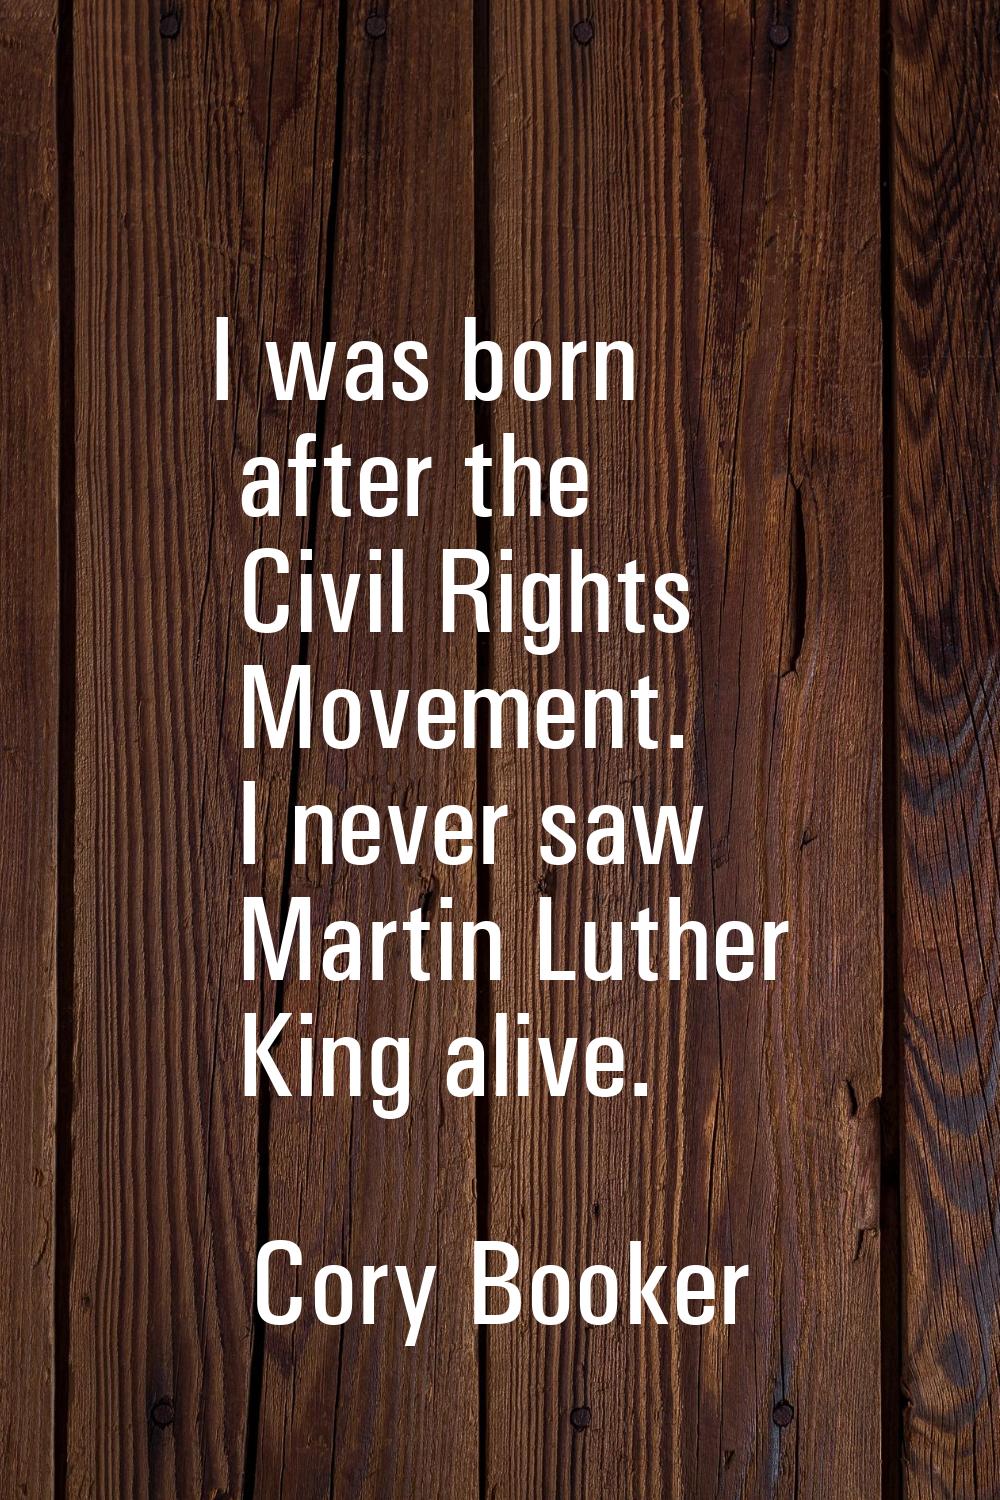 I was born after the Civil Rights Movement. I never saw Martin Luther King alive.